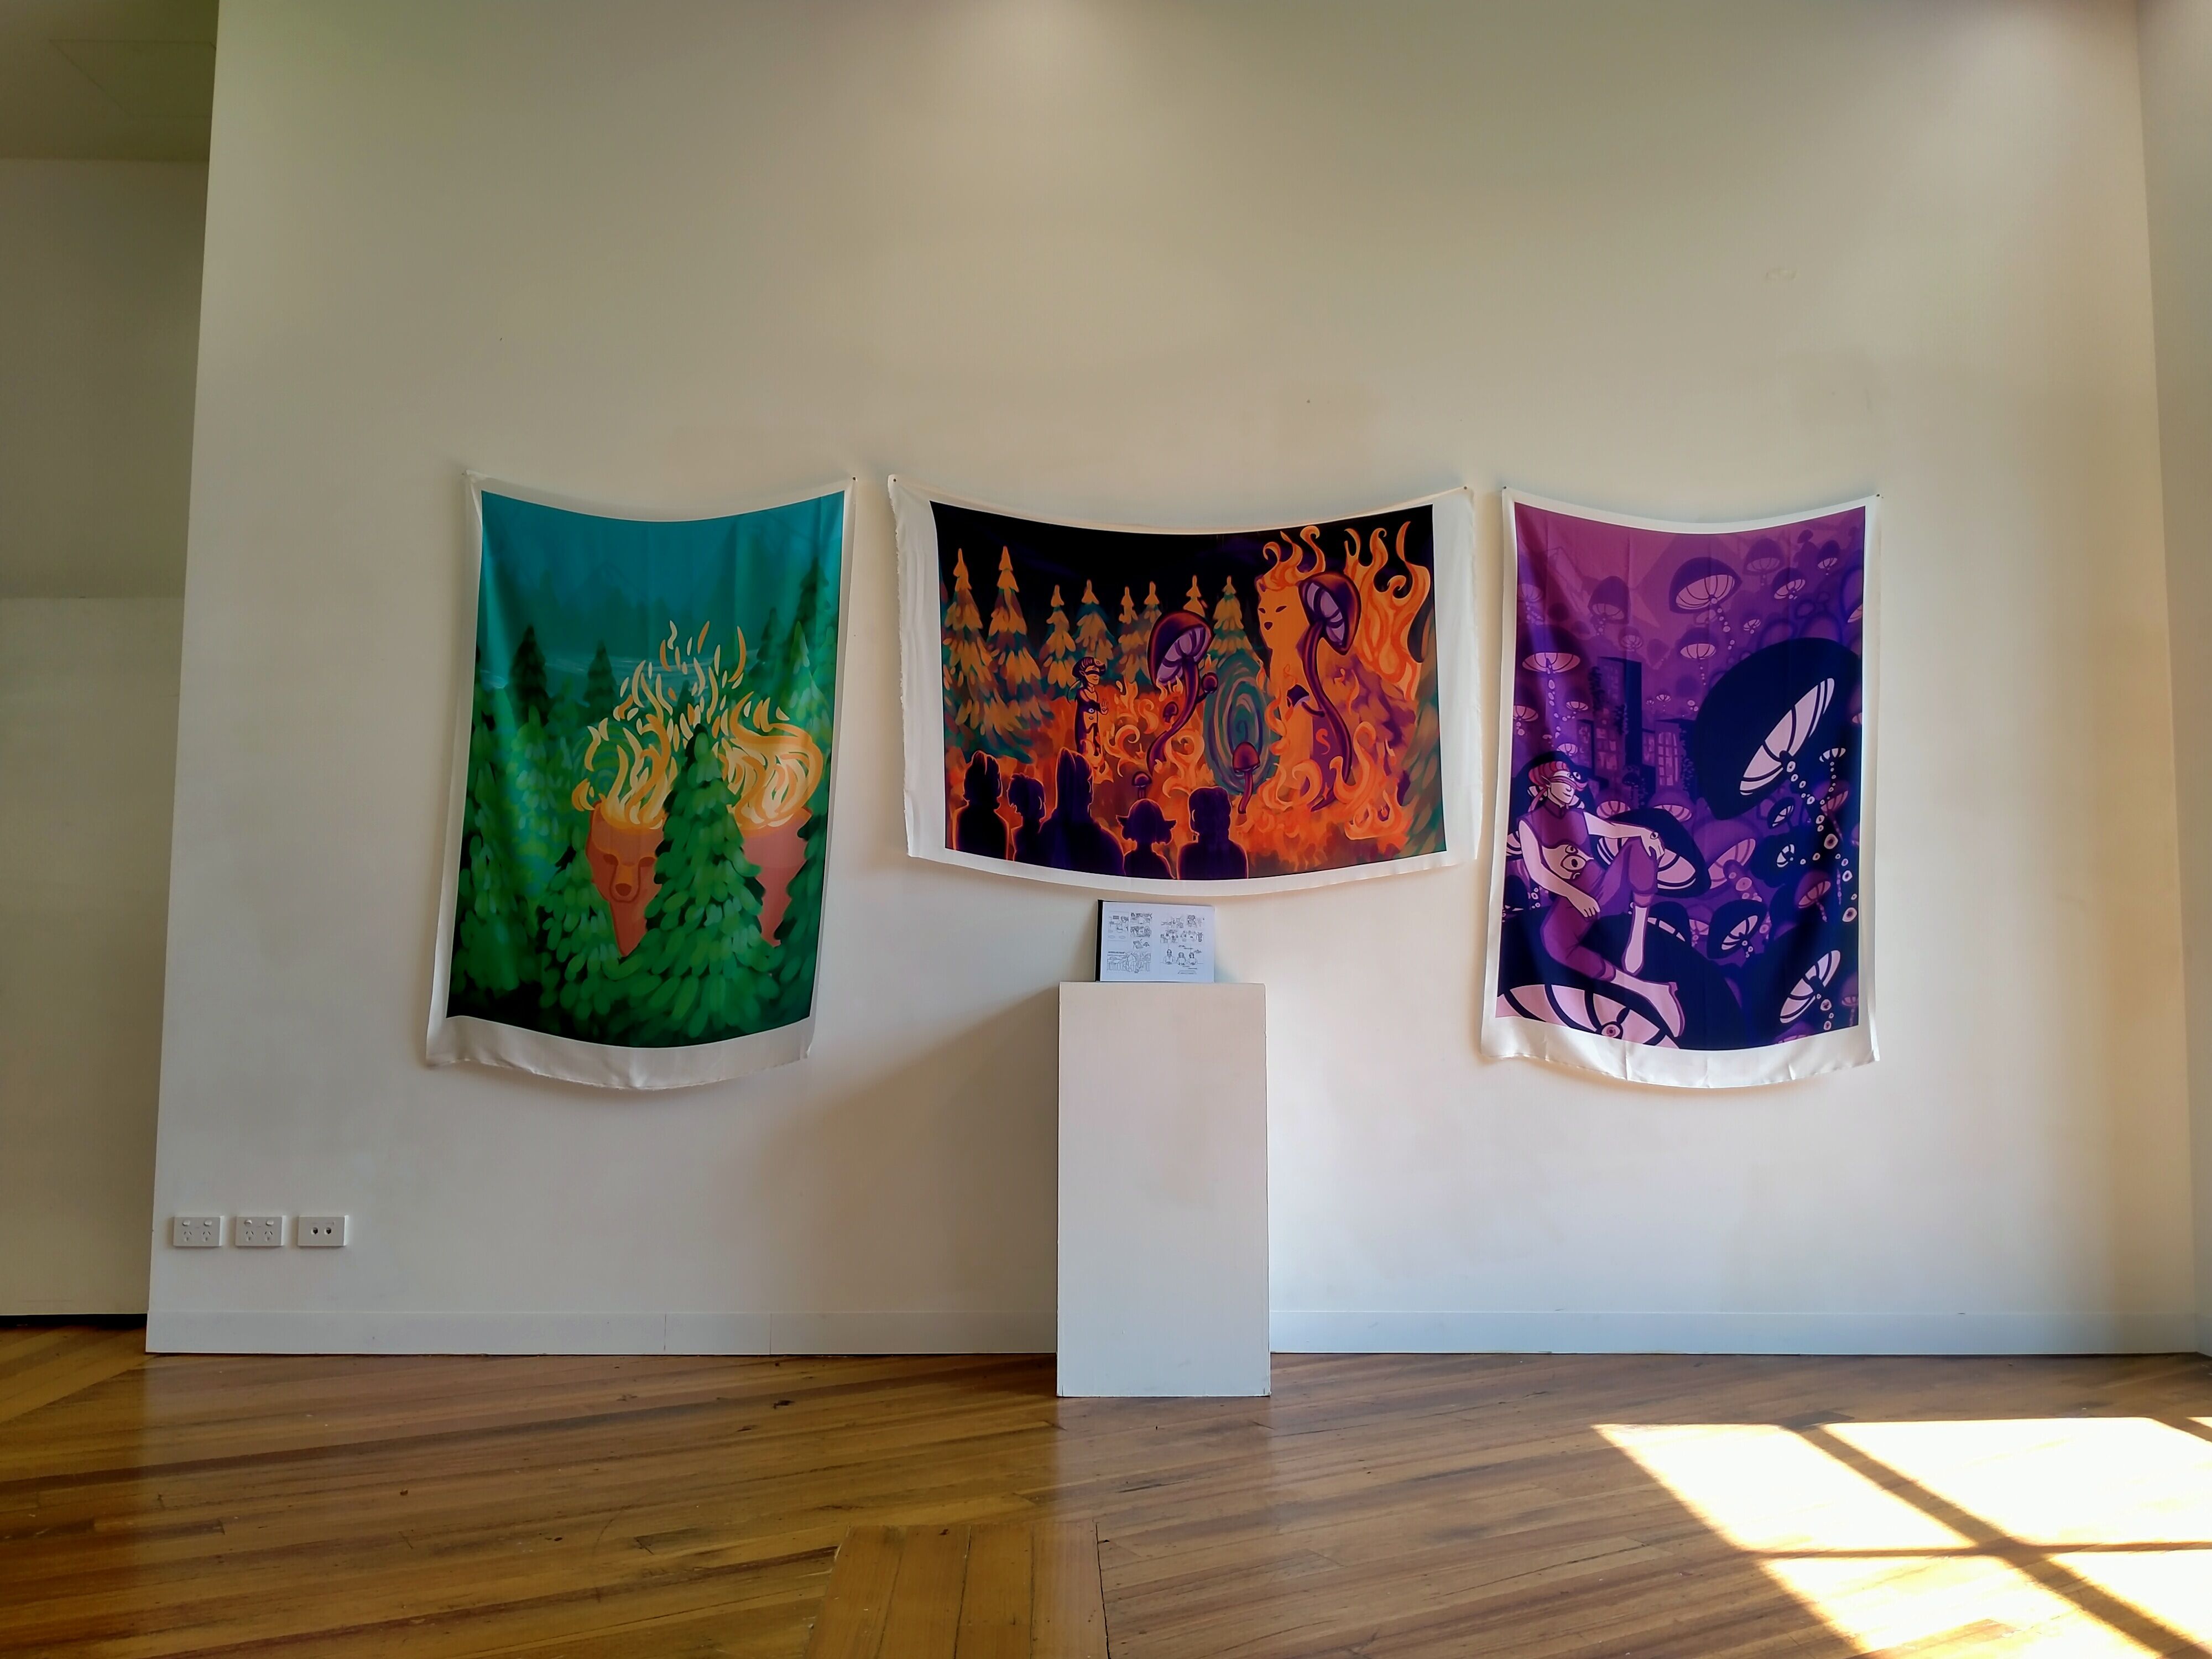 Three colorful tapestries depicting abstract and mythical themes displayed on a gallery wall, illuminated by natural light.